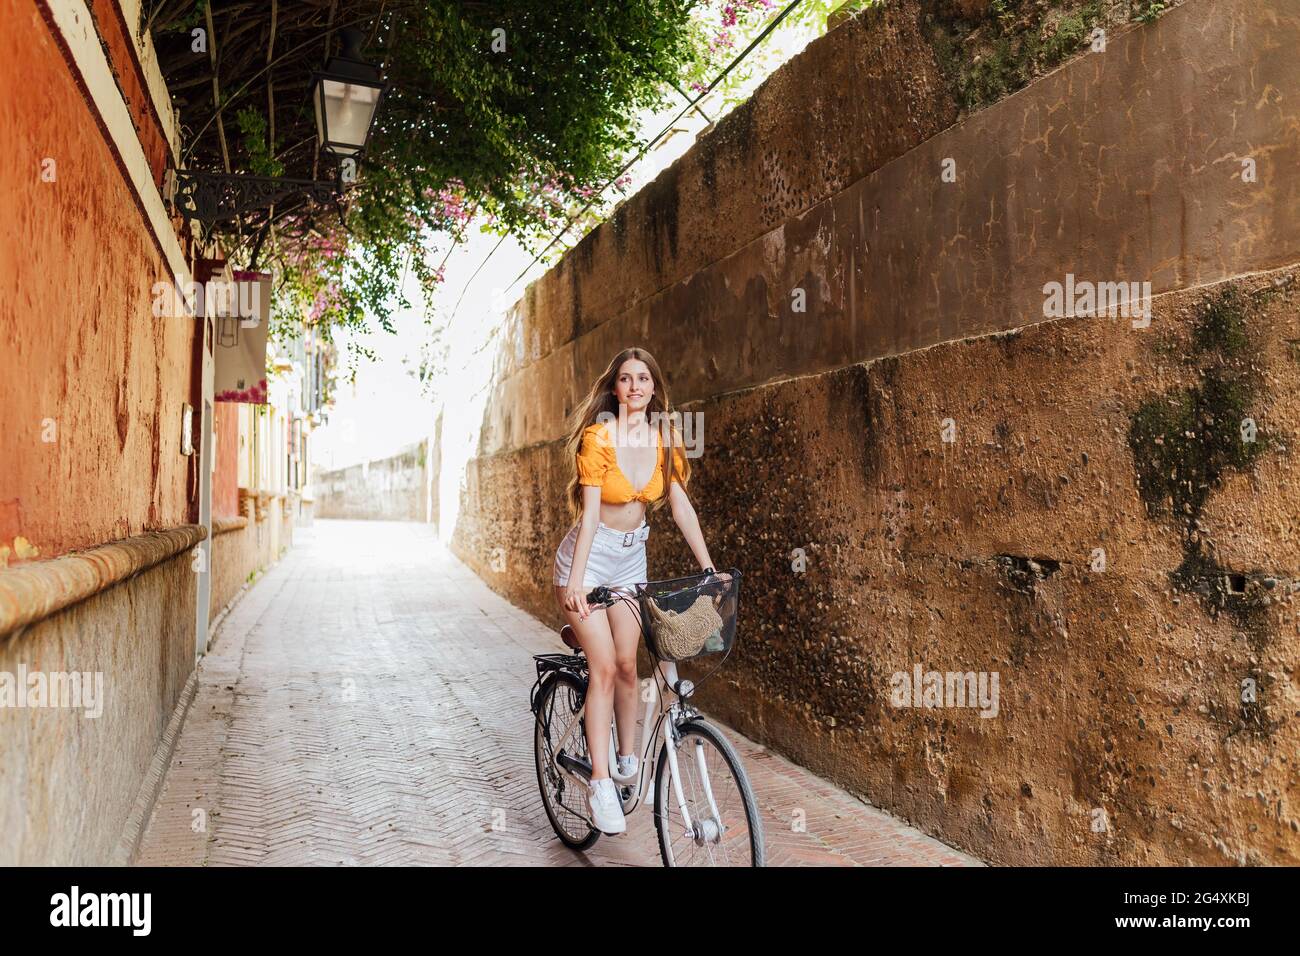 Smiling woman cycling in alley Stock Photo